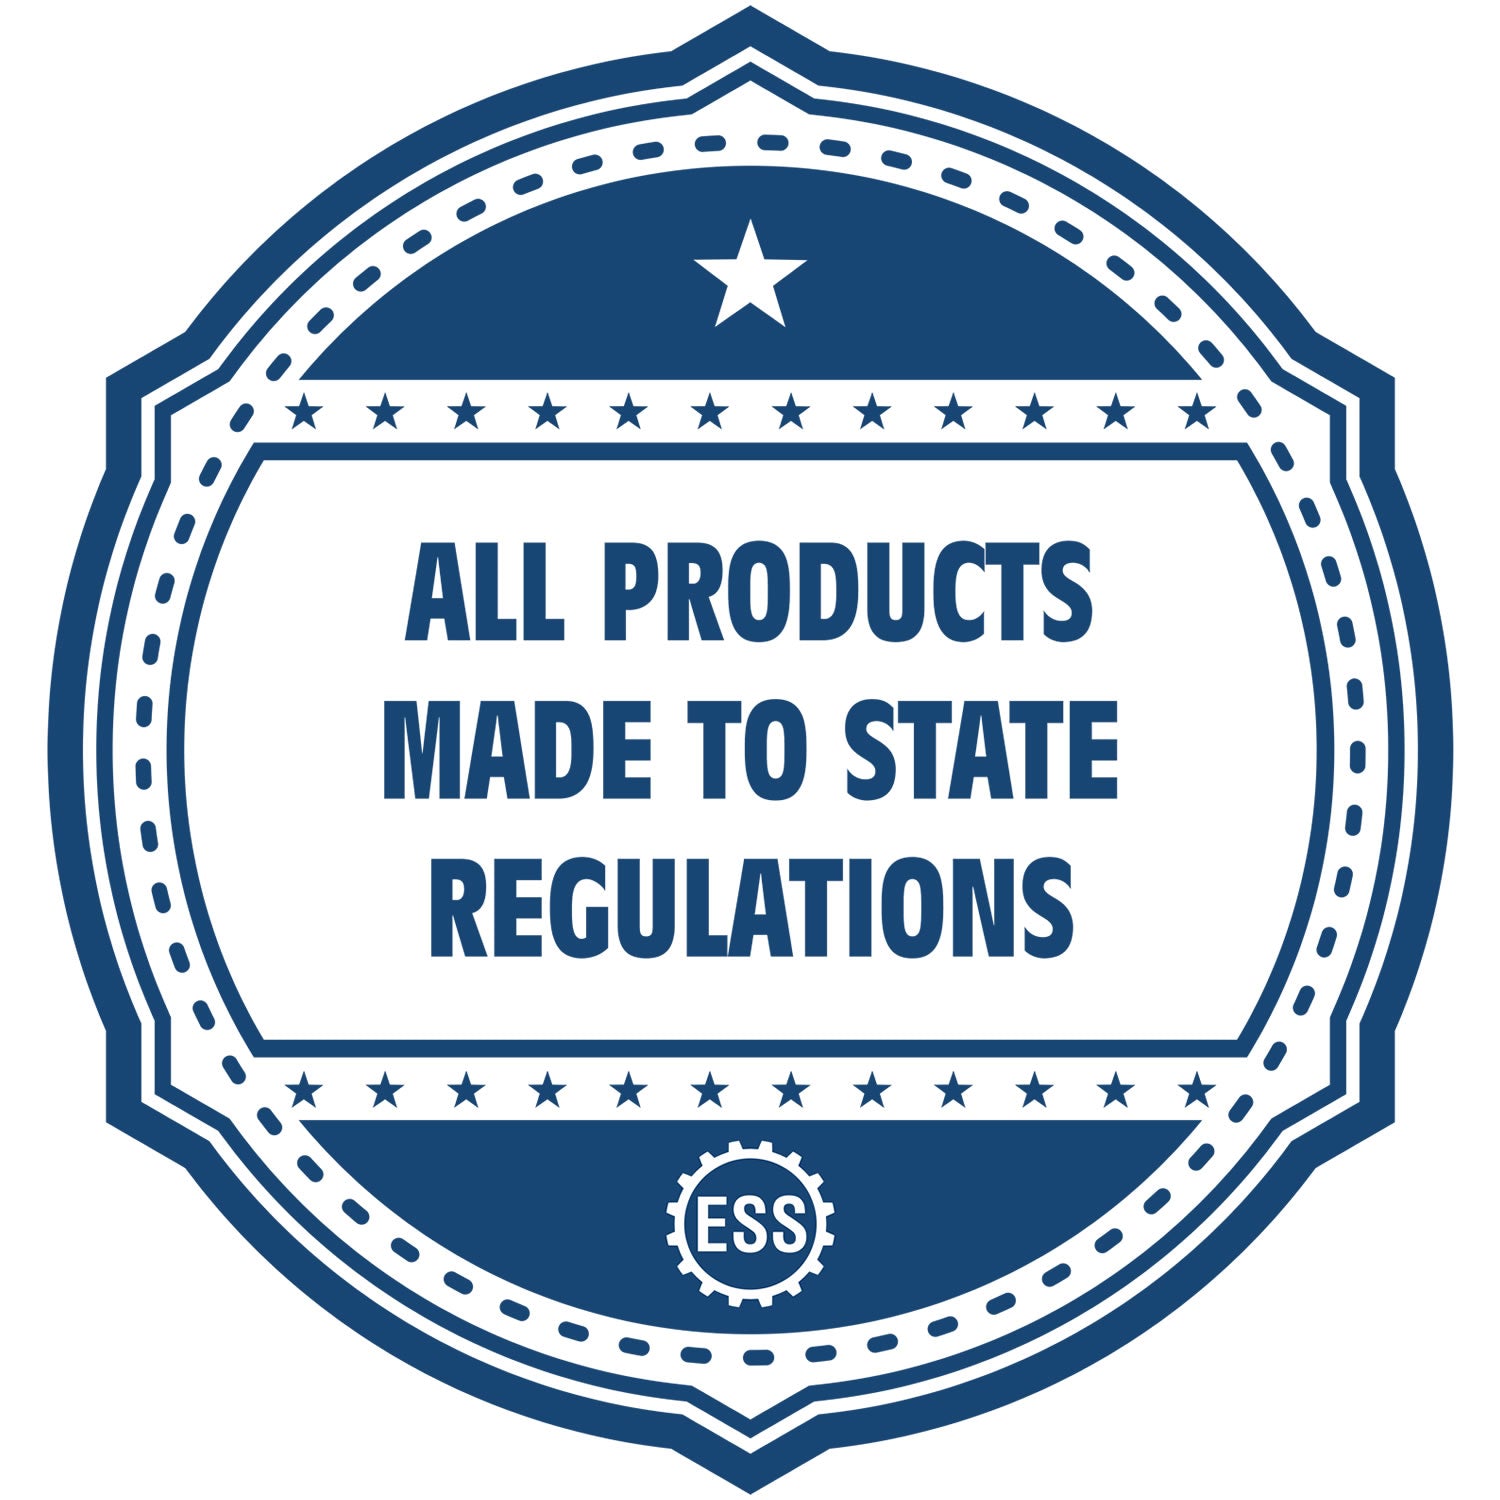 An icon or badge element for the Oregon Professional Engineer Seal Stamp showing that this product is made in compliance with state regulations.